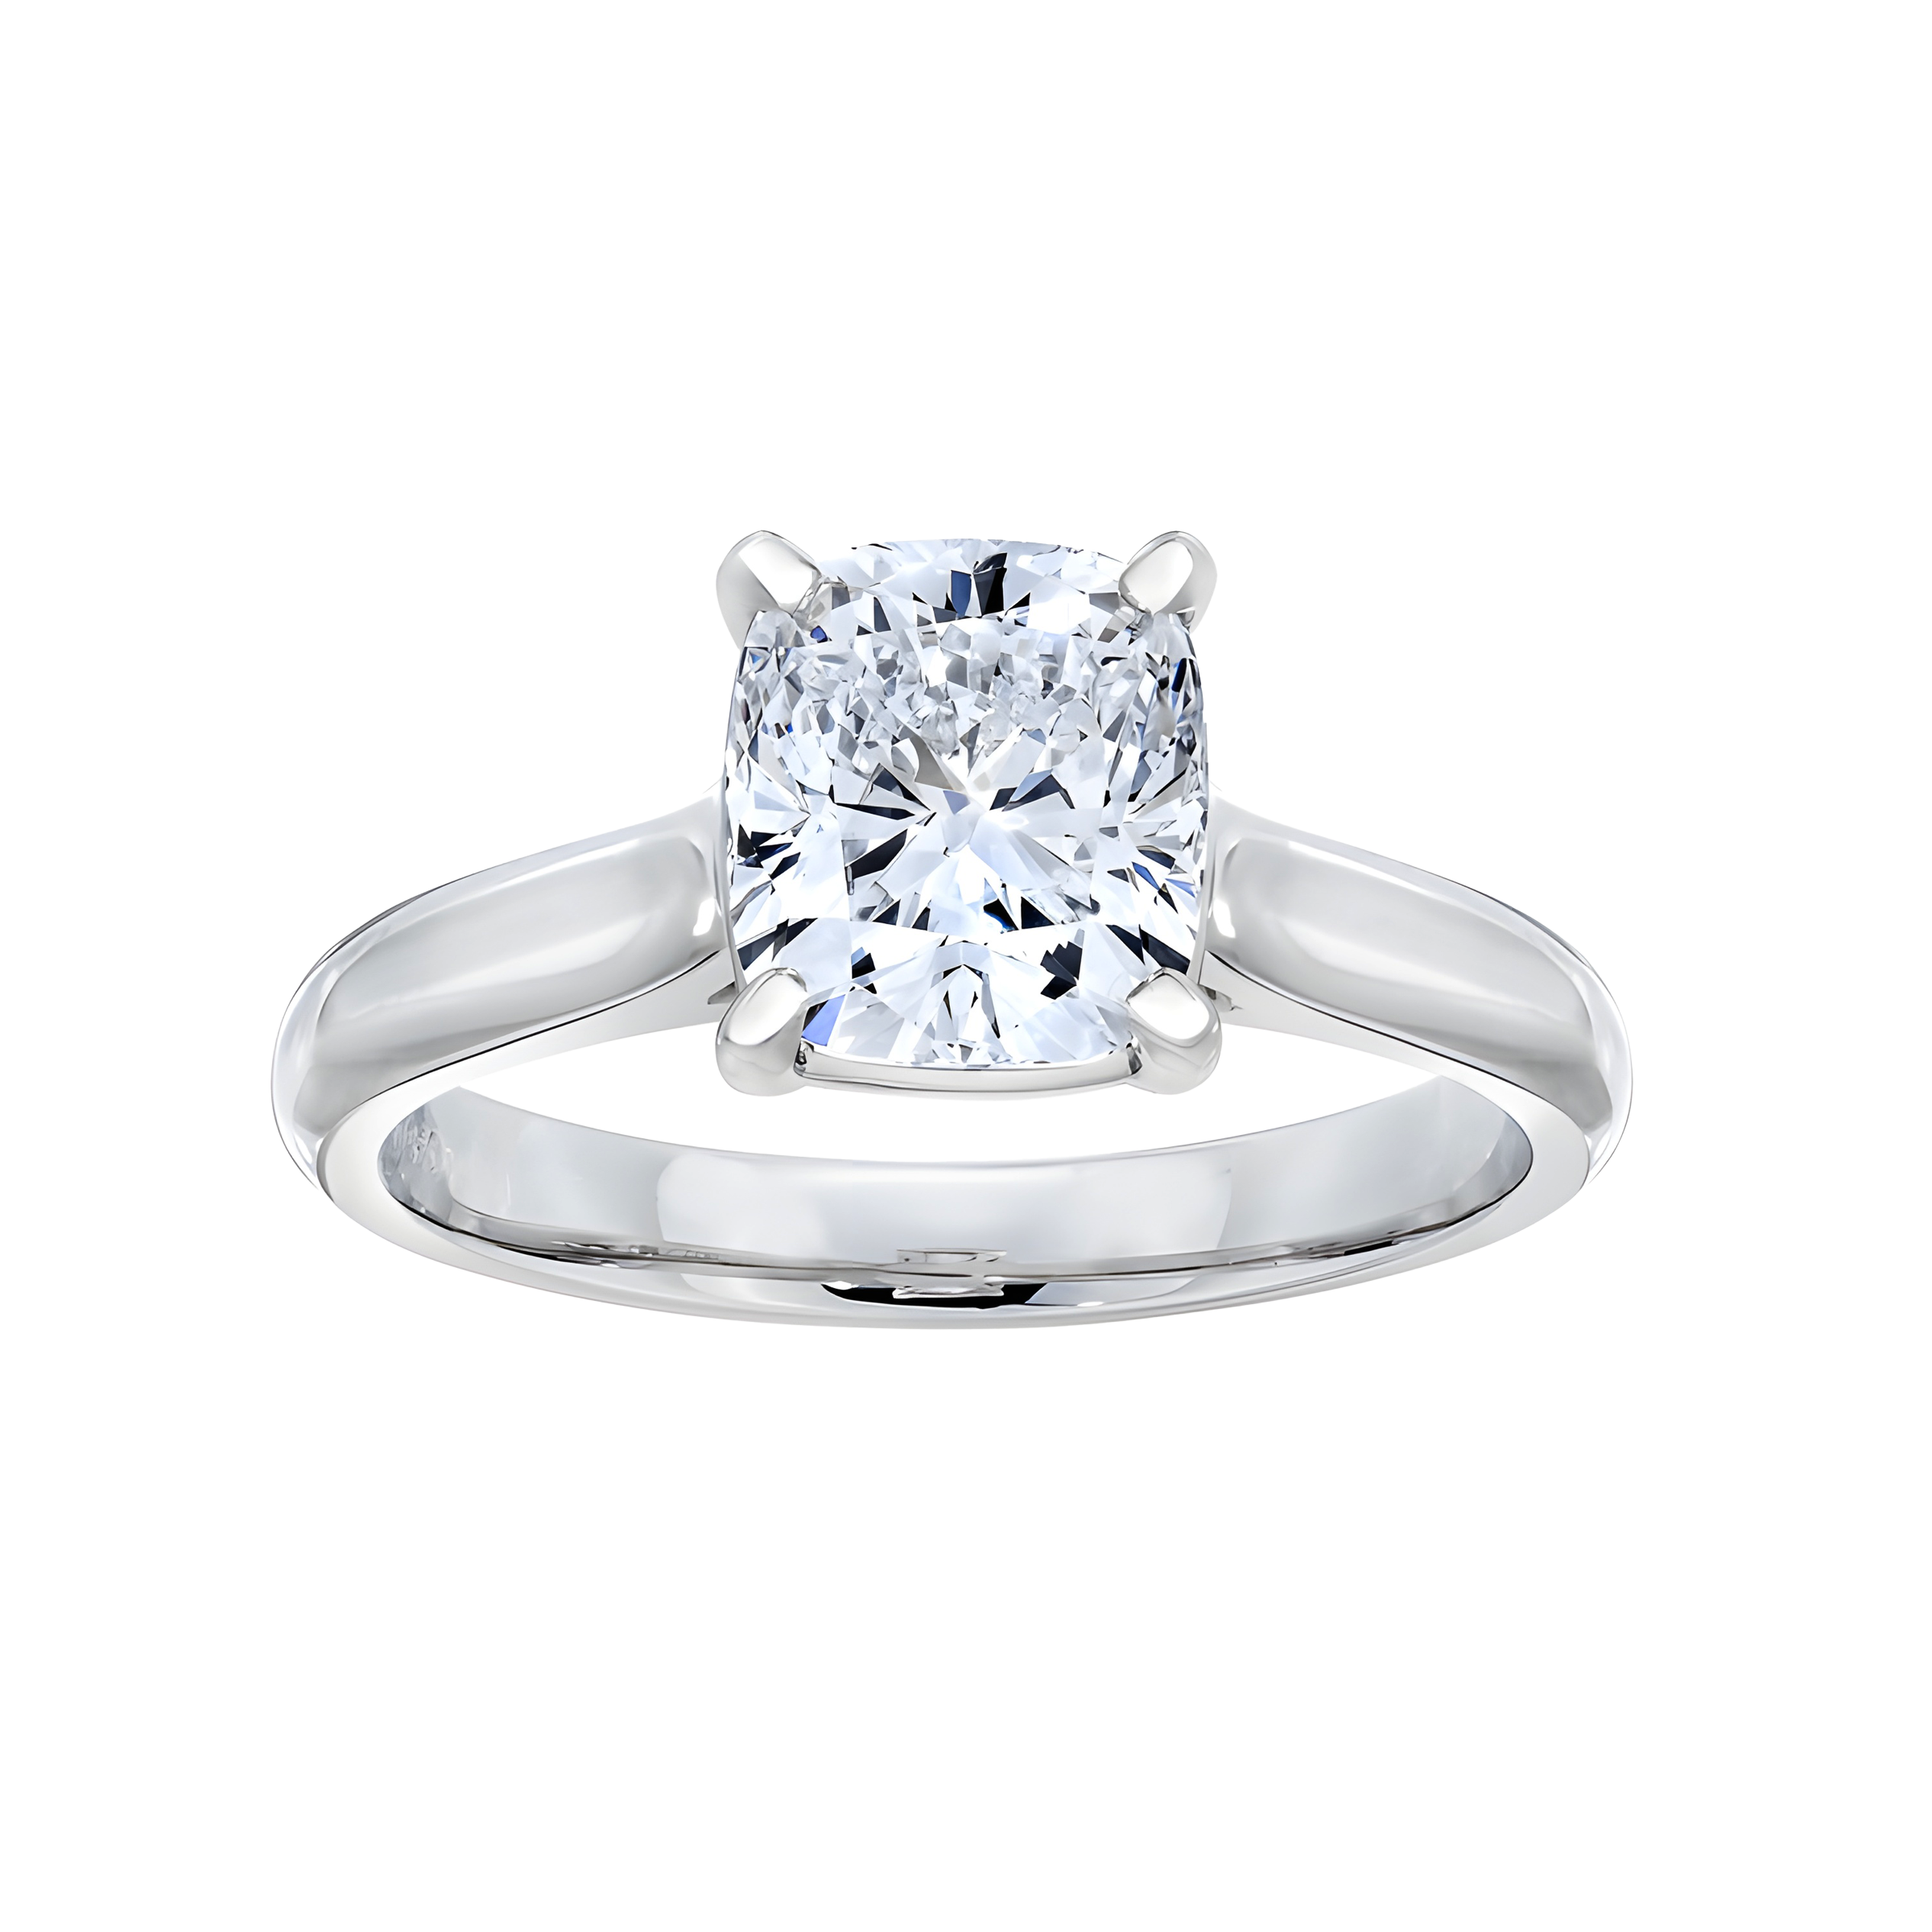 Cushion Cut Solitaire Diamond Engagement Ring in 18k White Gold